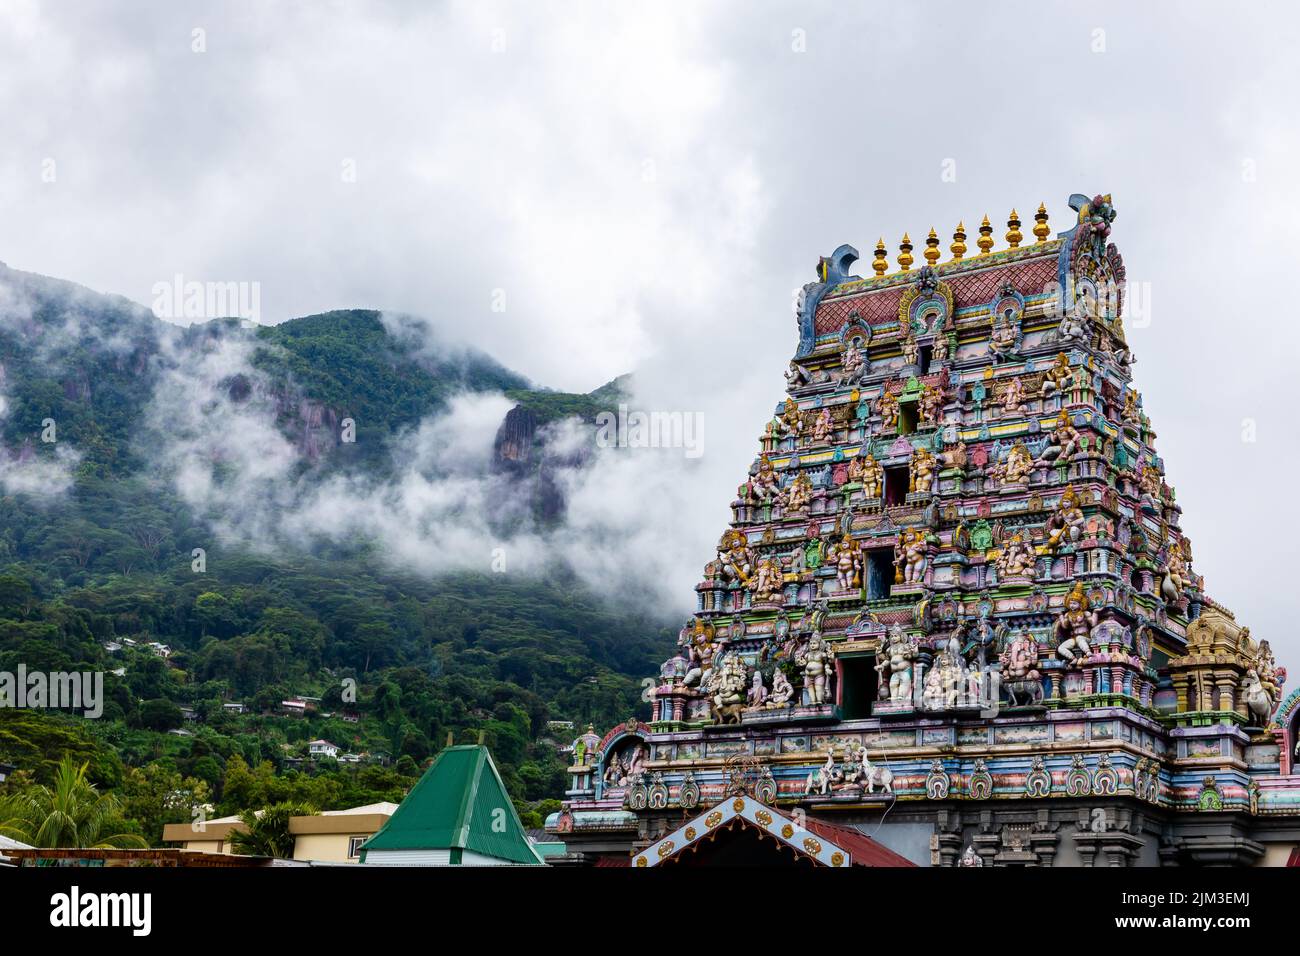 Arul Mihu Navasakthi Vinayagar Temple with colorful traditional Hindu gods and deities sculptures and tropical mountains in clouds in the background Stock Photo